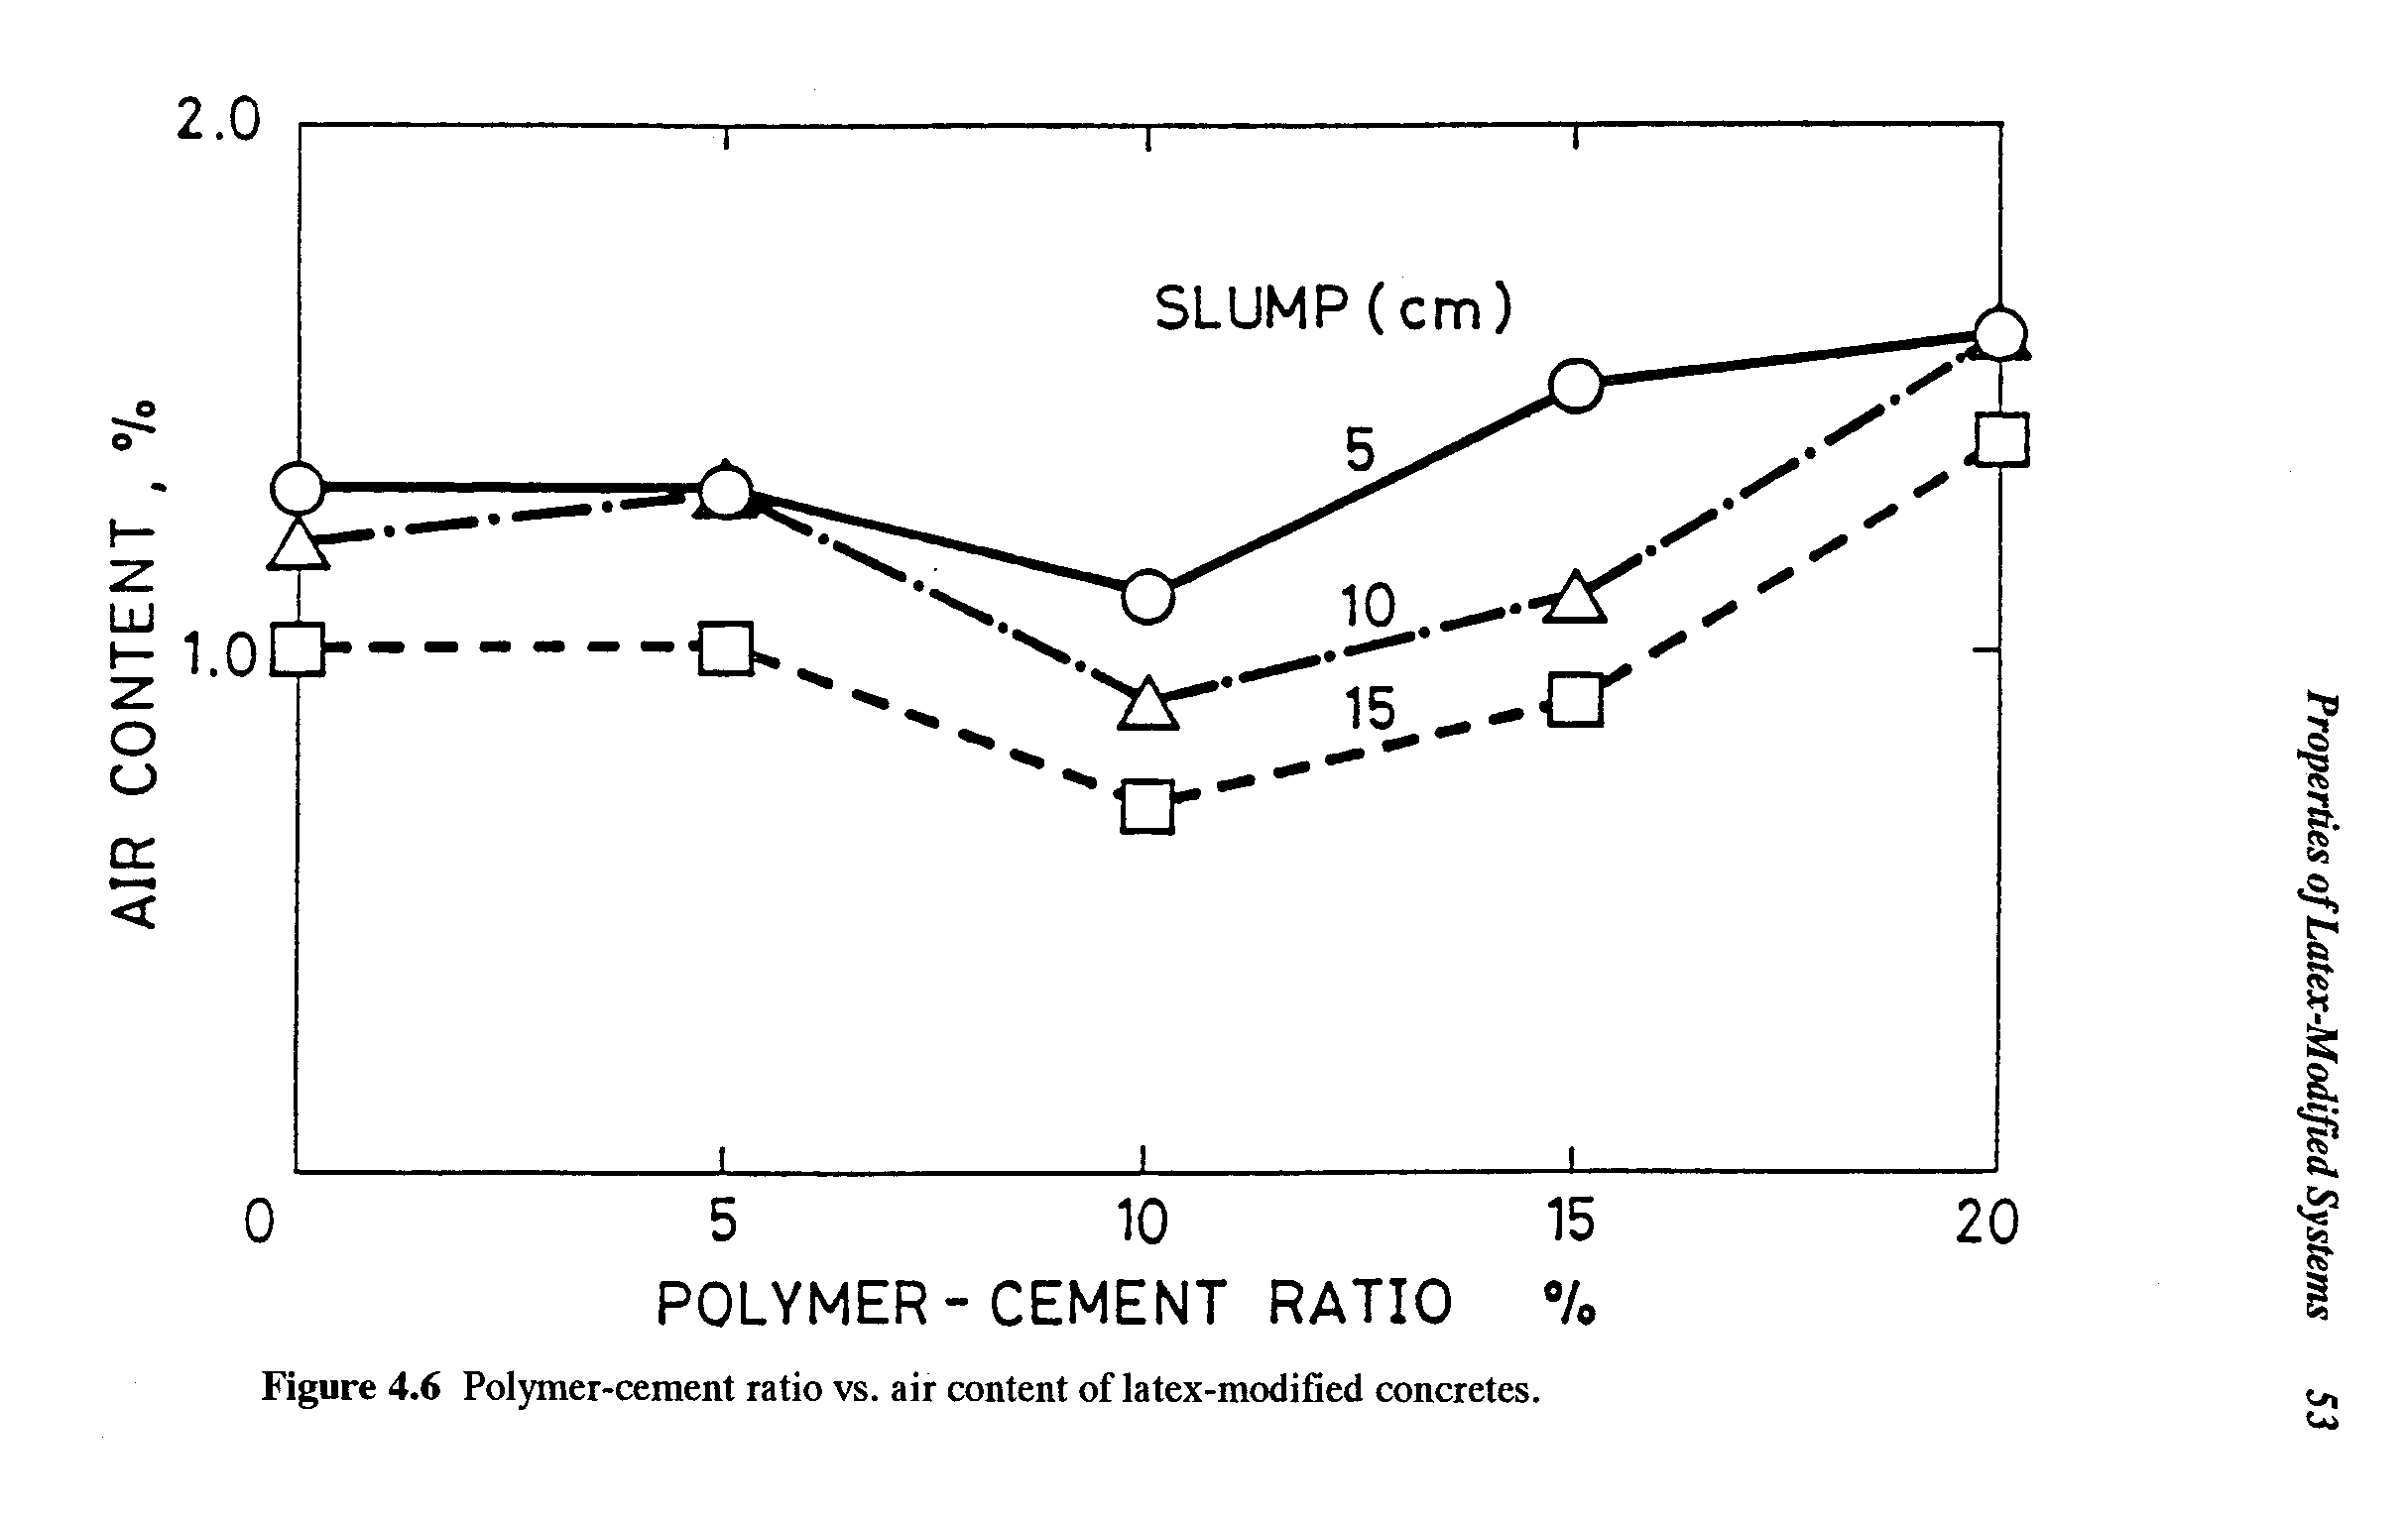 Figure 4.6 Polymer-cement ratio vs. air content of latex-modified concretes.